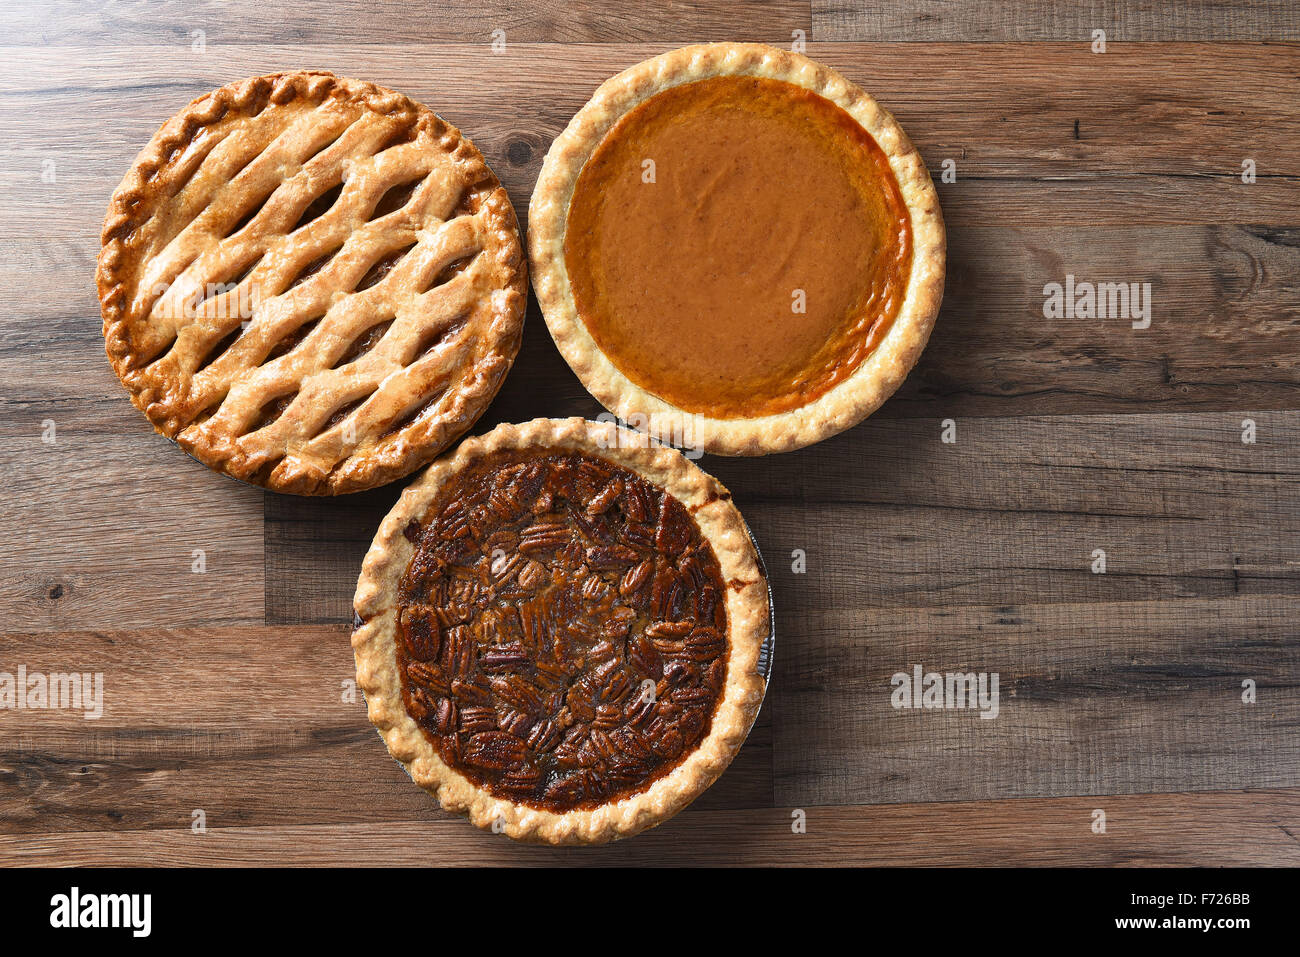 Three pies for Thanksgiving on a wood surface. The desserts include apple, pumpkin and pecan pies - all traditional treats for t Stock Photo